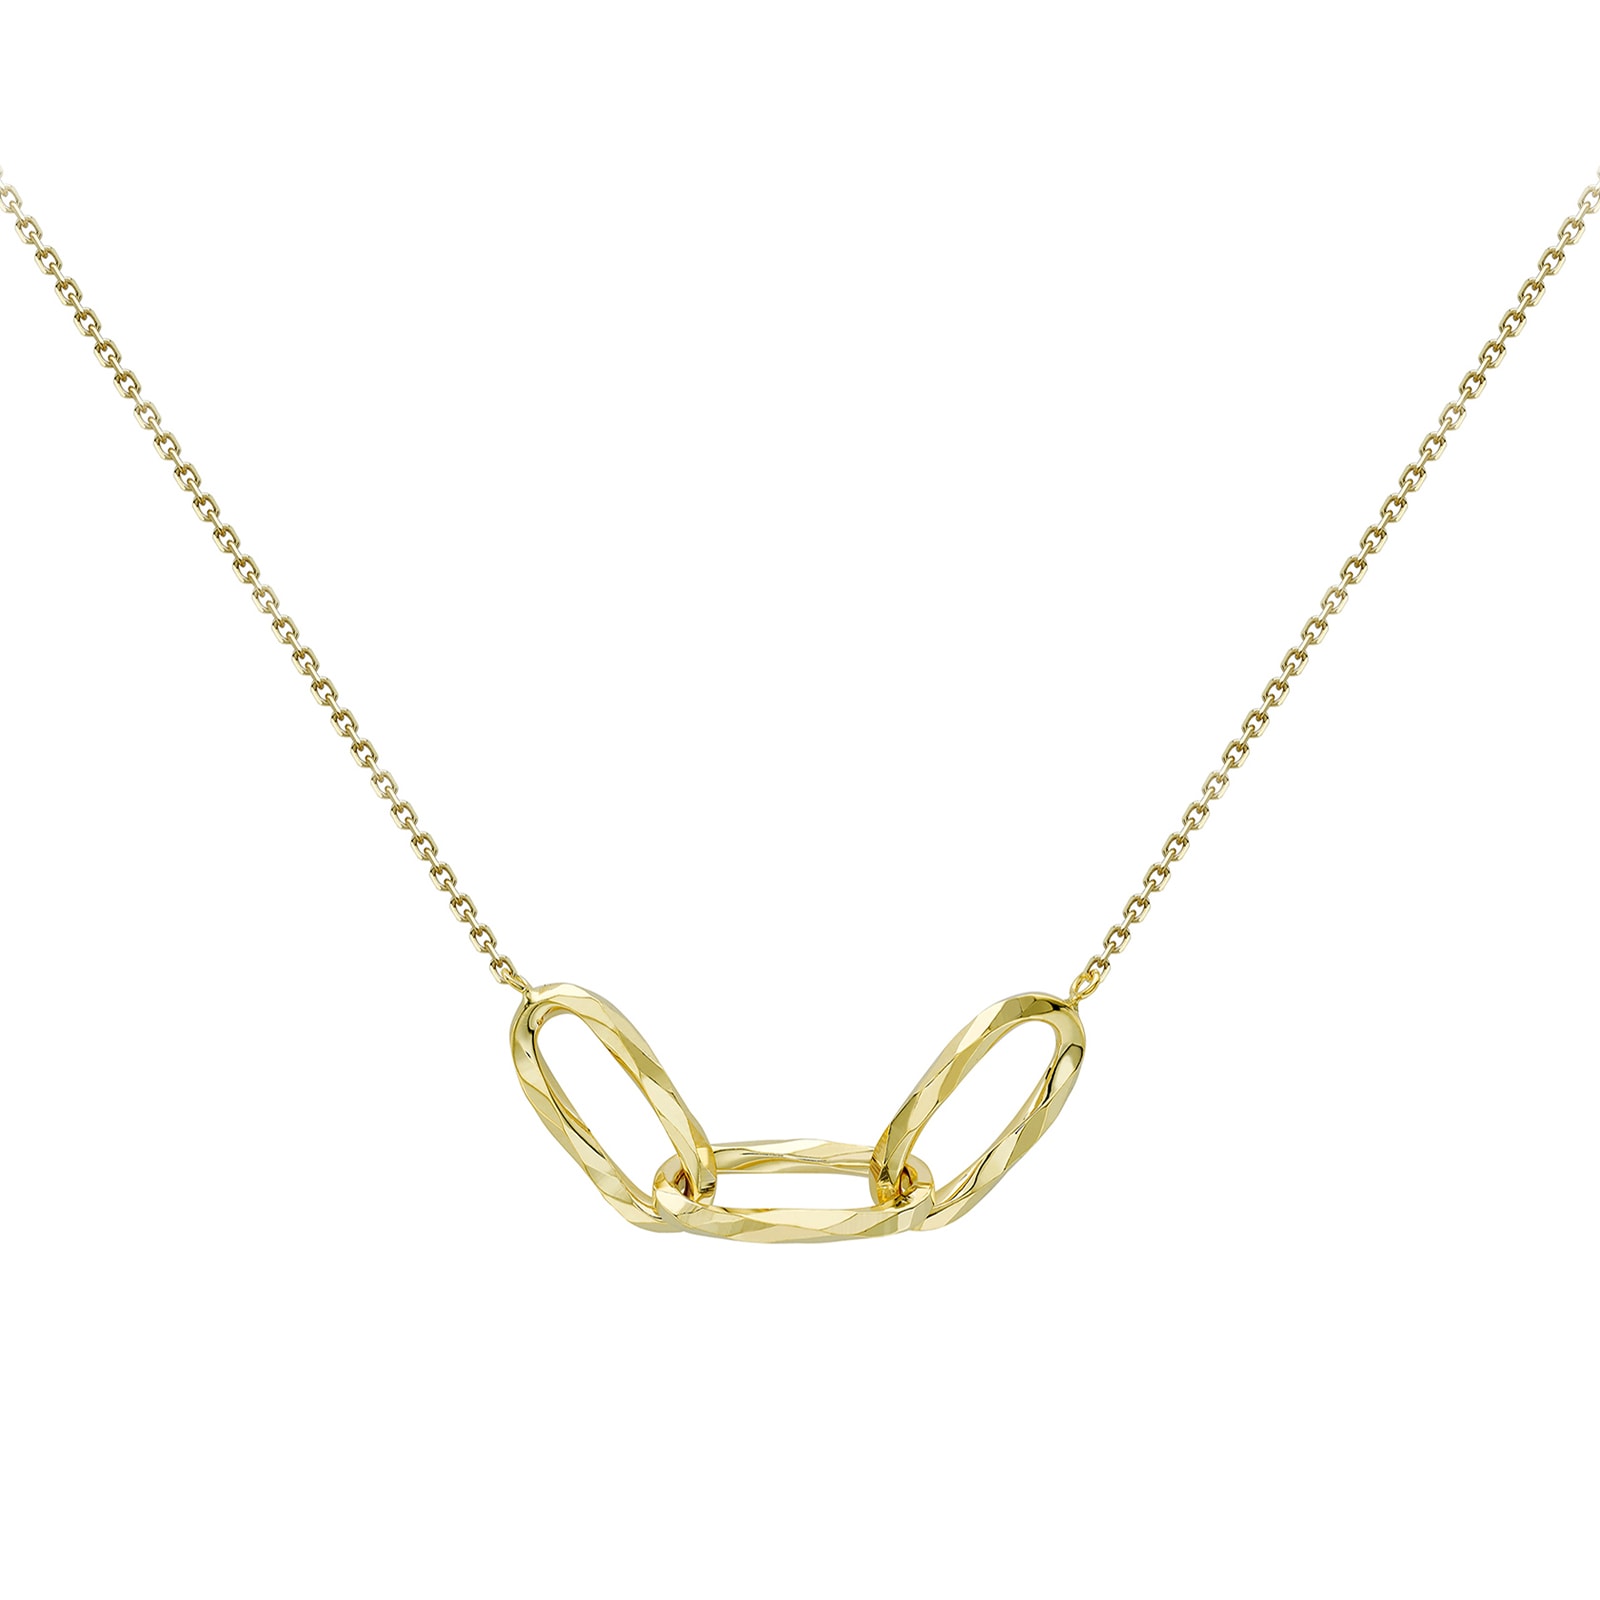 9ct Yellow Gold Diamond Cut Linked Ovals Necklace